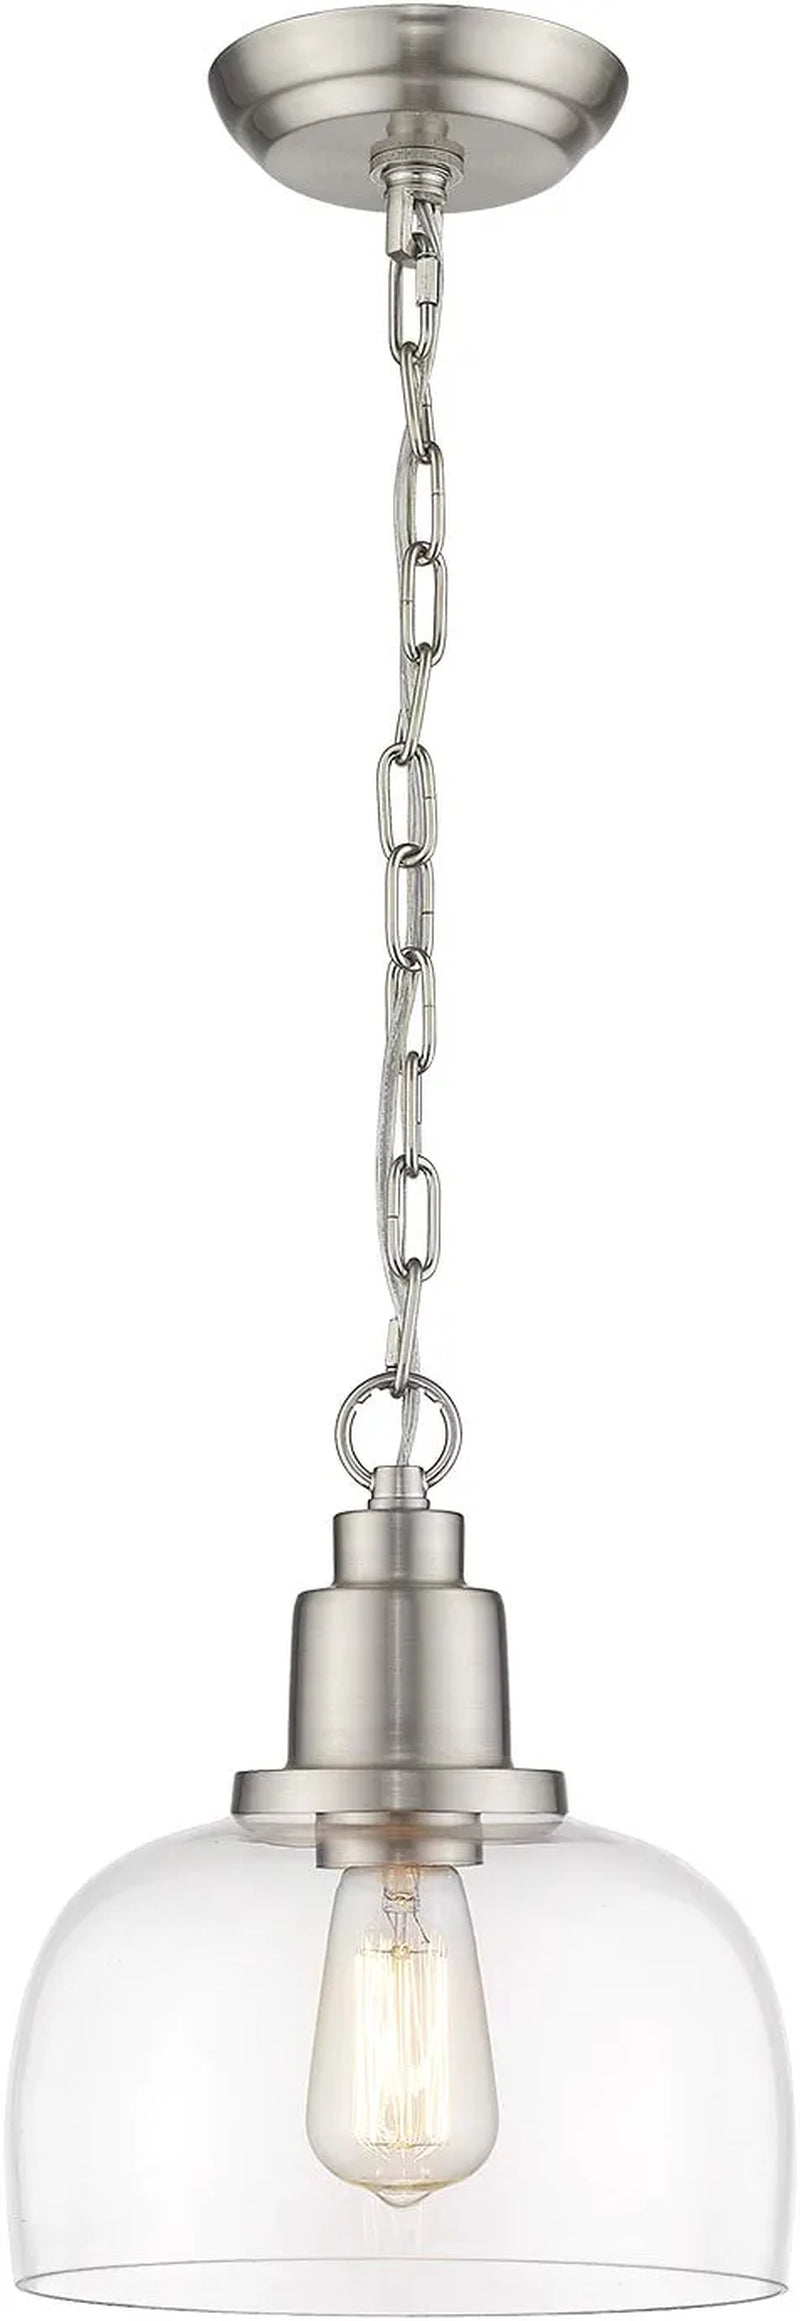 EAPUDUN Modern Farmhouse Pendant Light, 1-Light Industrial Hanging Light Fixture 9.3-Inch, Brushed Nickel Finish with Clear Glass Shade, PDA1127-BNK Home & Garden > Lighting > Lighting Fixtures EAPUDUN Brushed Nickel 1 Light 